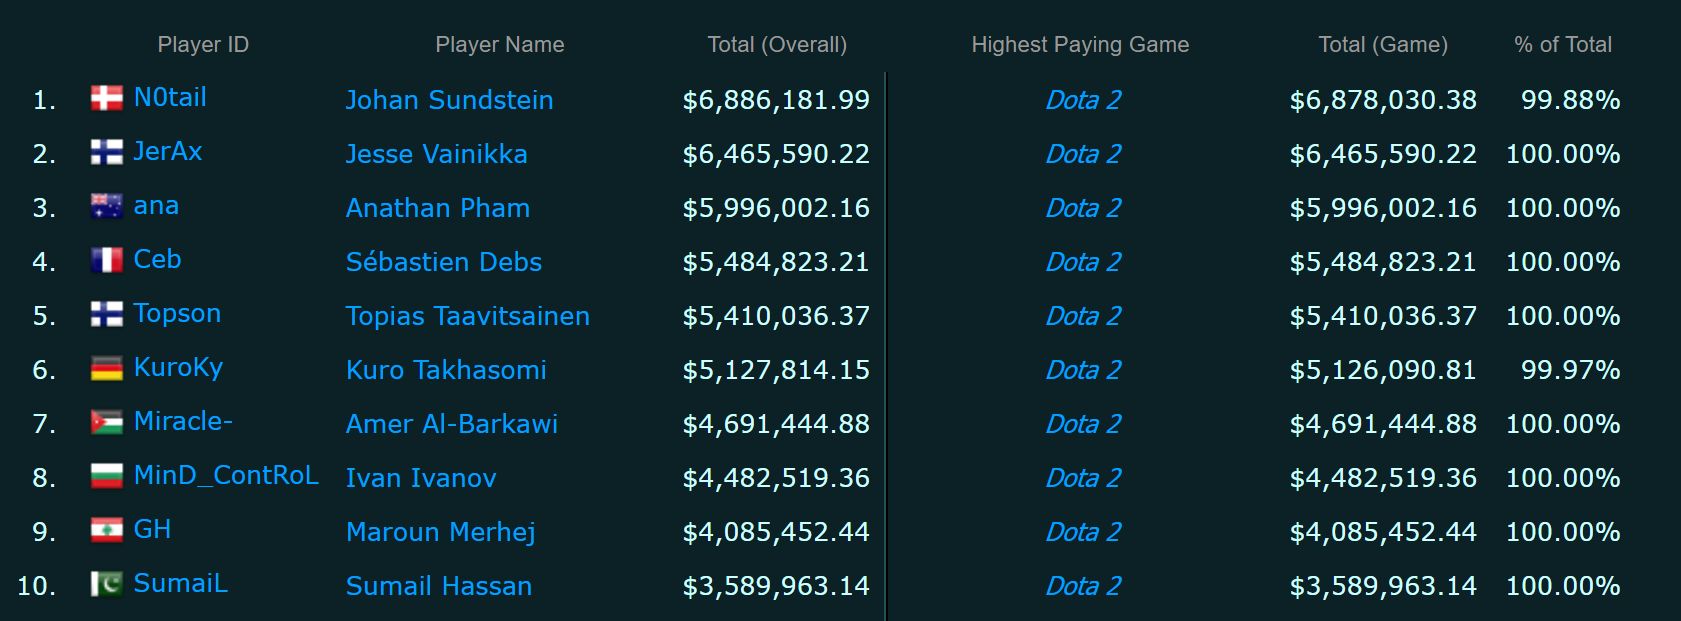 Highest Earning Esports Players